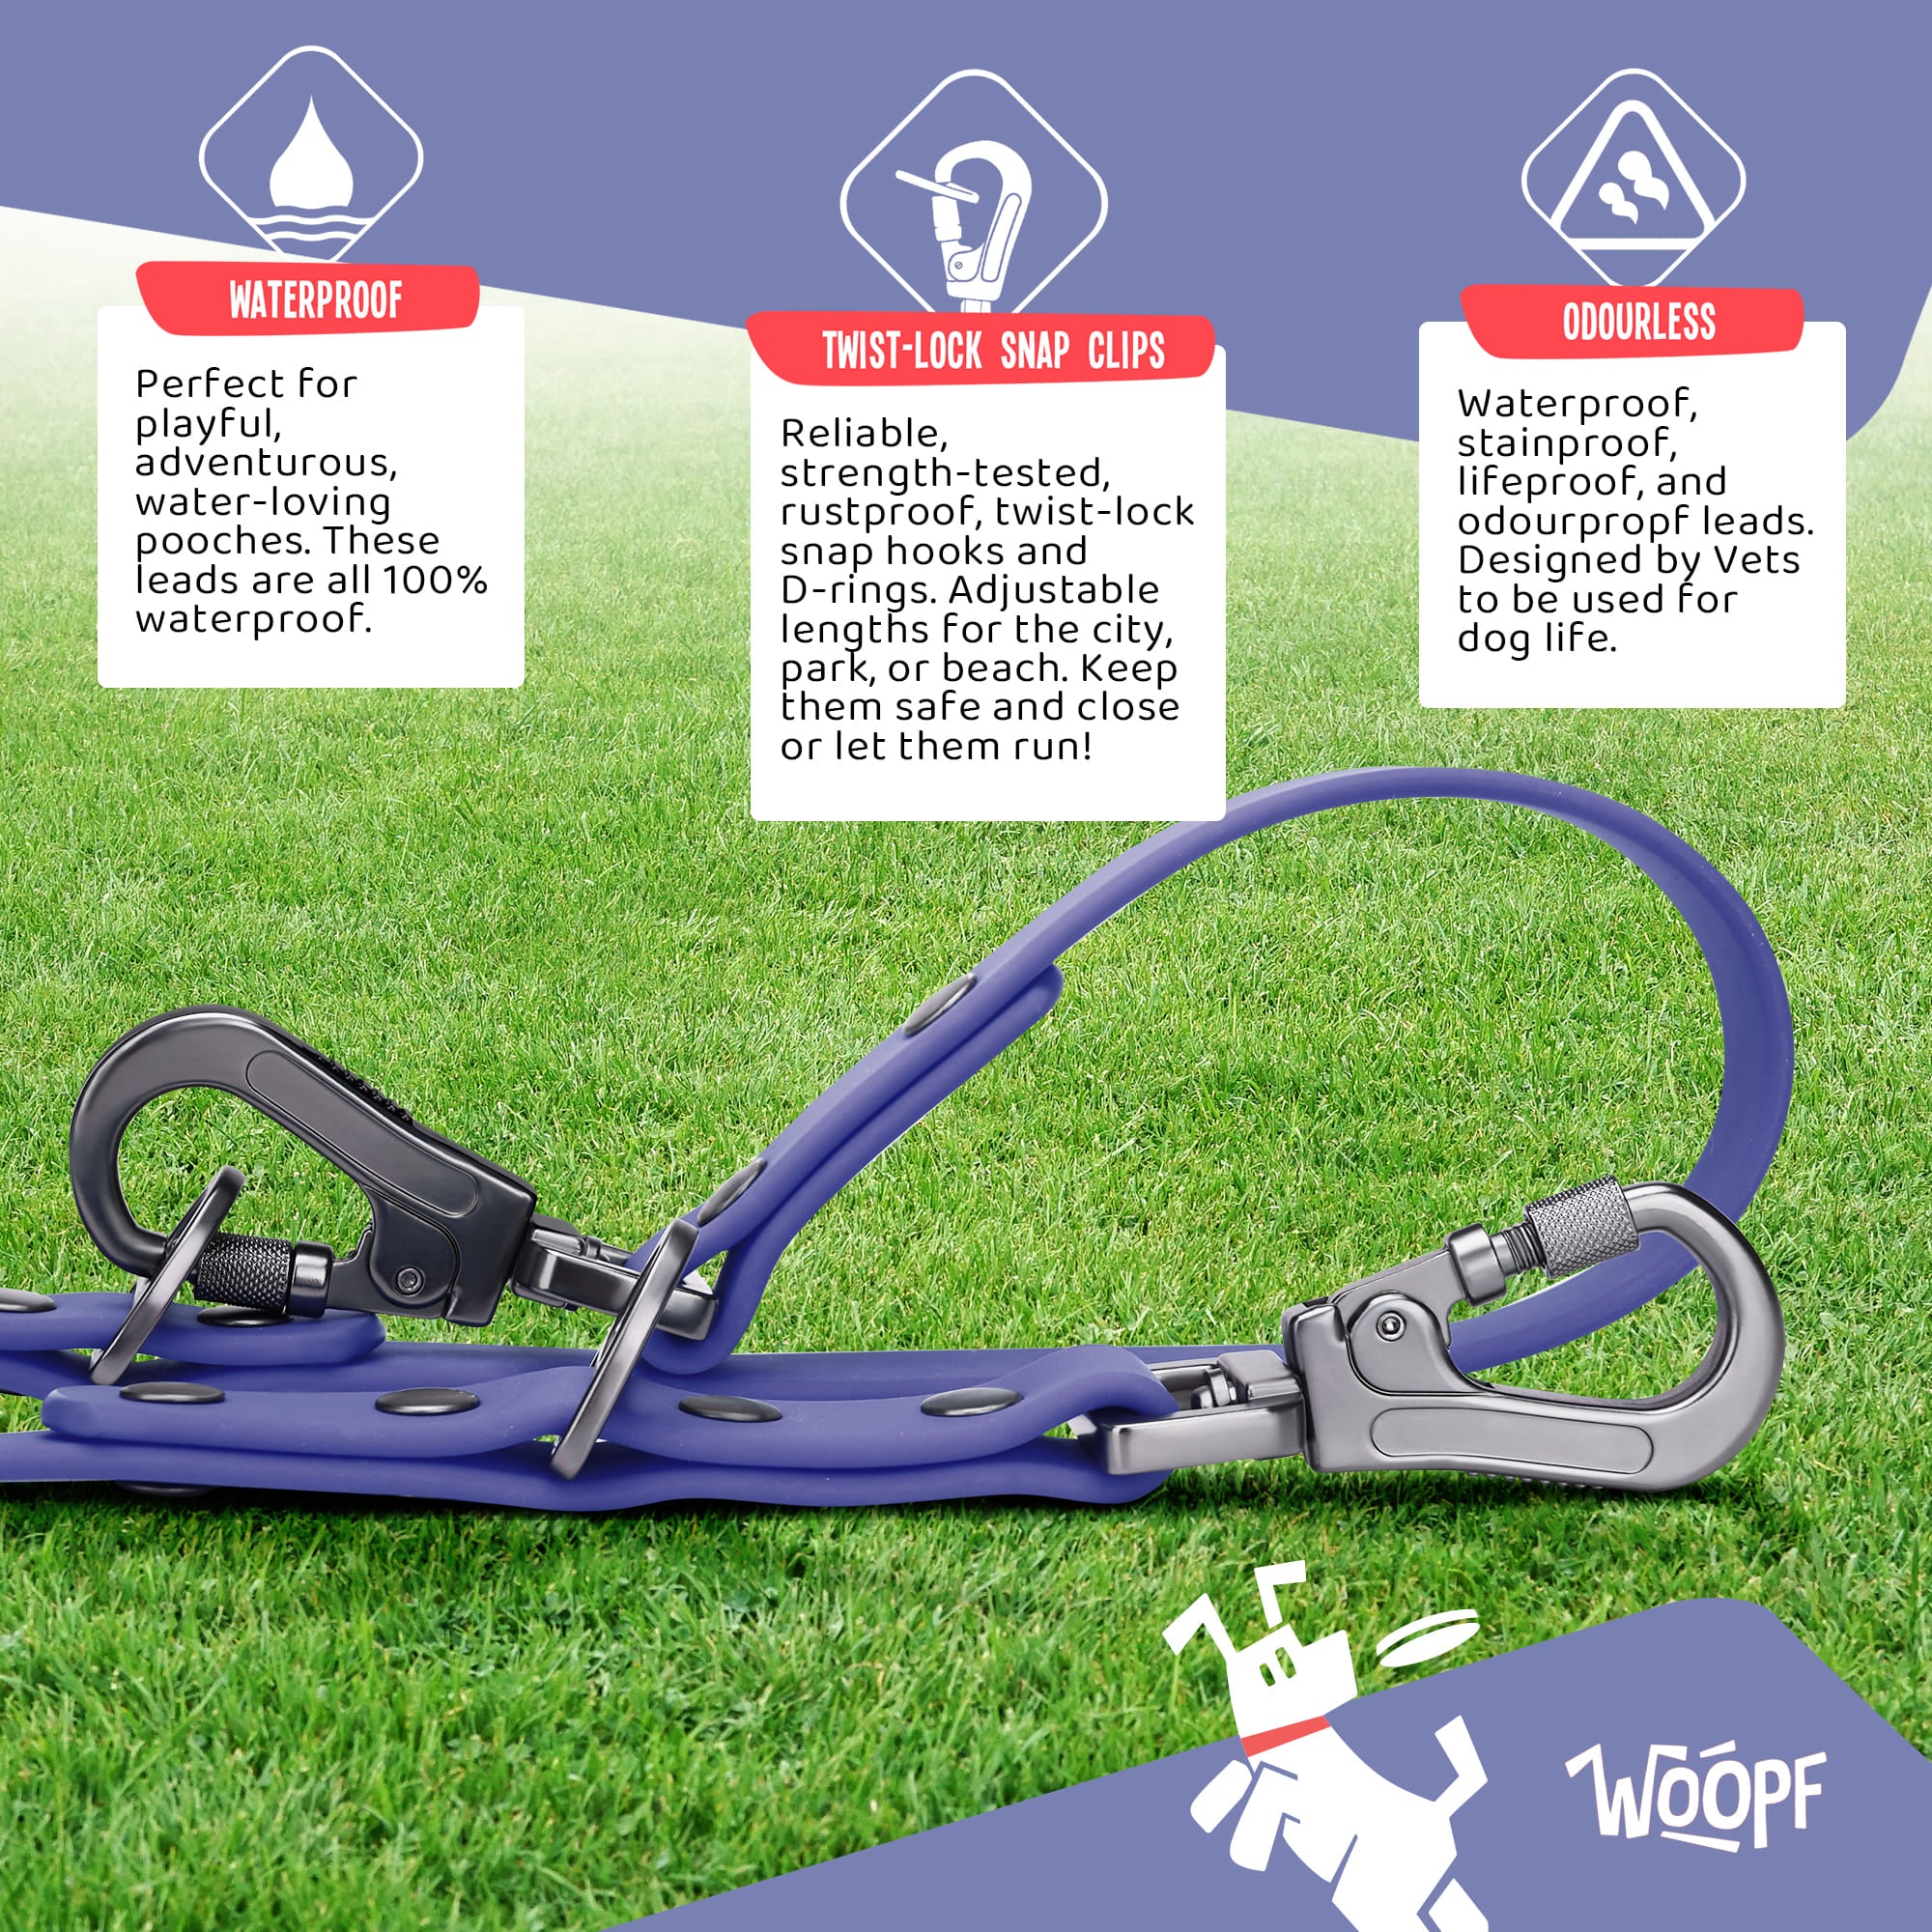 WOOPF Waterproof, All Weather, Strong and Easy to Clean Dog Lead | Small, Medium, and Large Dogs (Purple)